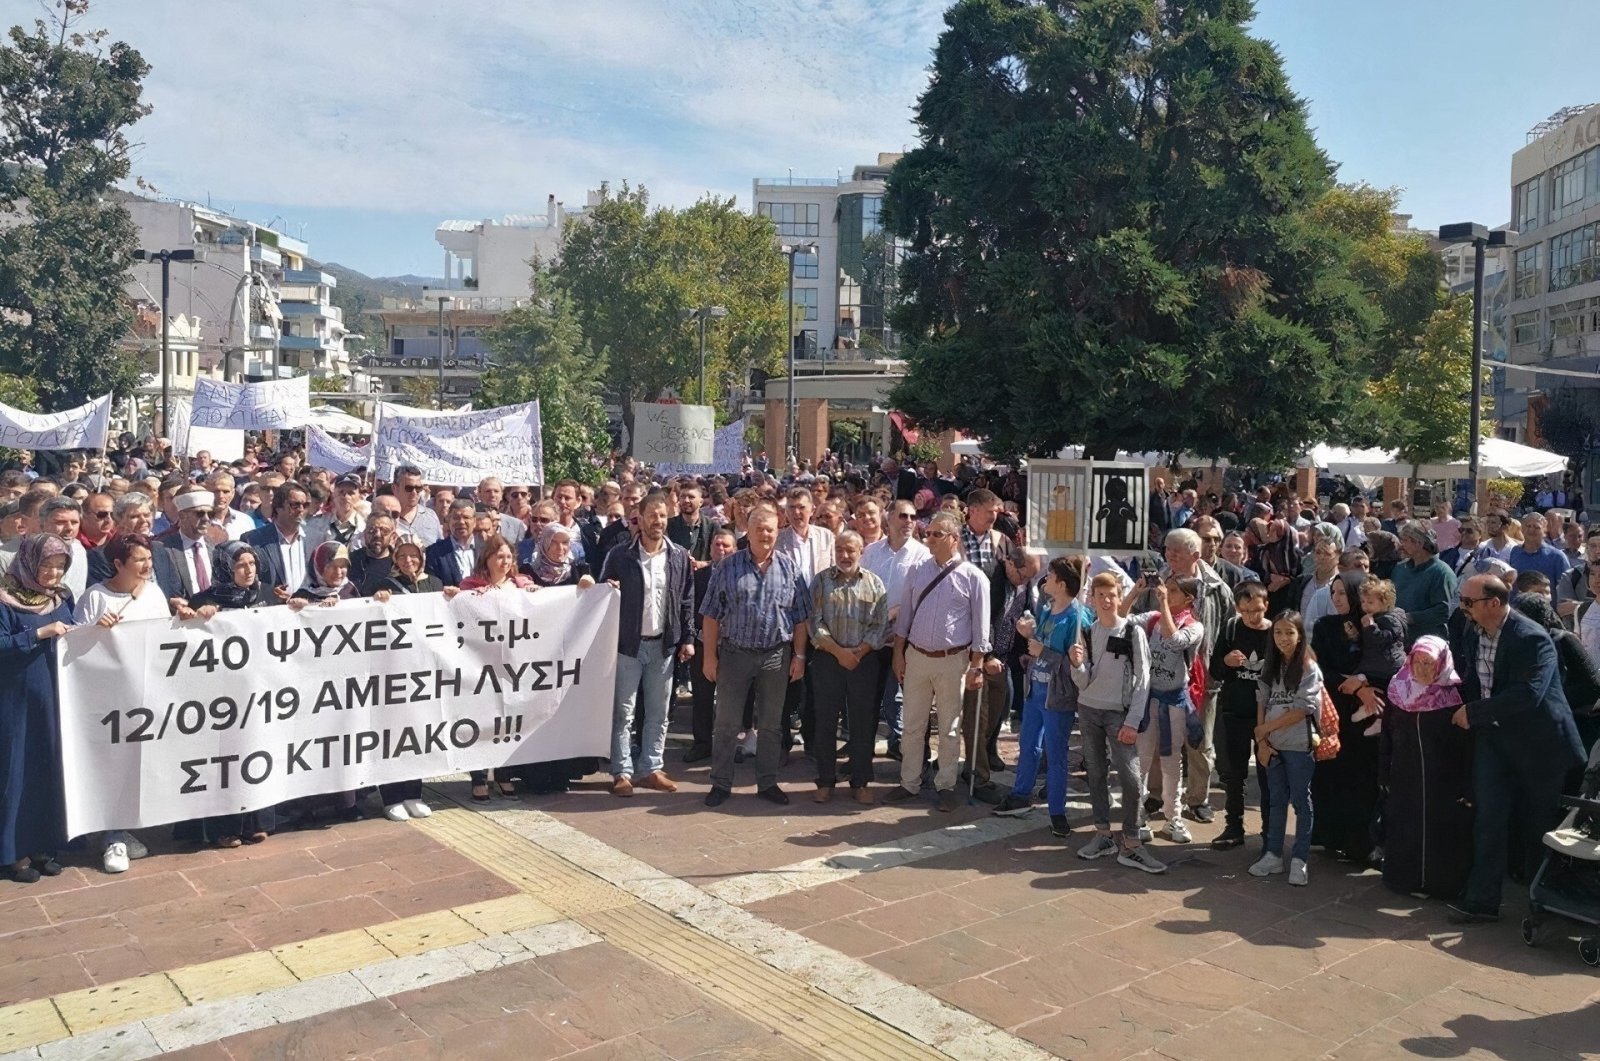 Turks in Western Thrace&#039;s Xanthi (İskeçe) province protest the Greek government&#039;s assimilation policies in education, Xanthi (İskeçe), Western Thrace, Greece, Sept. 24, 2019. (Sabah Photo)